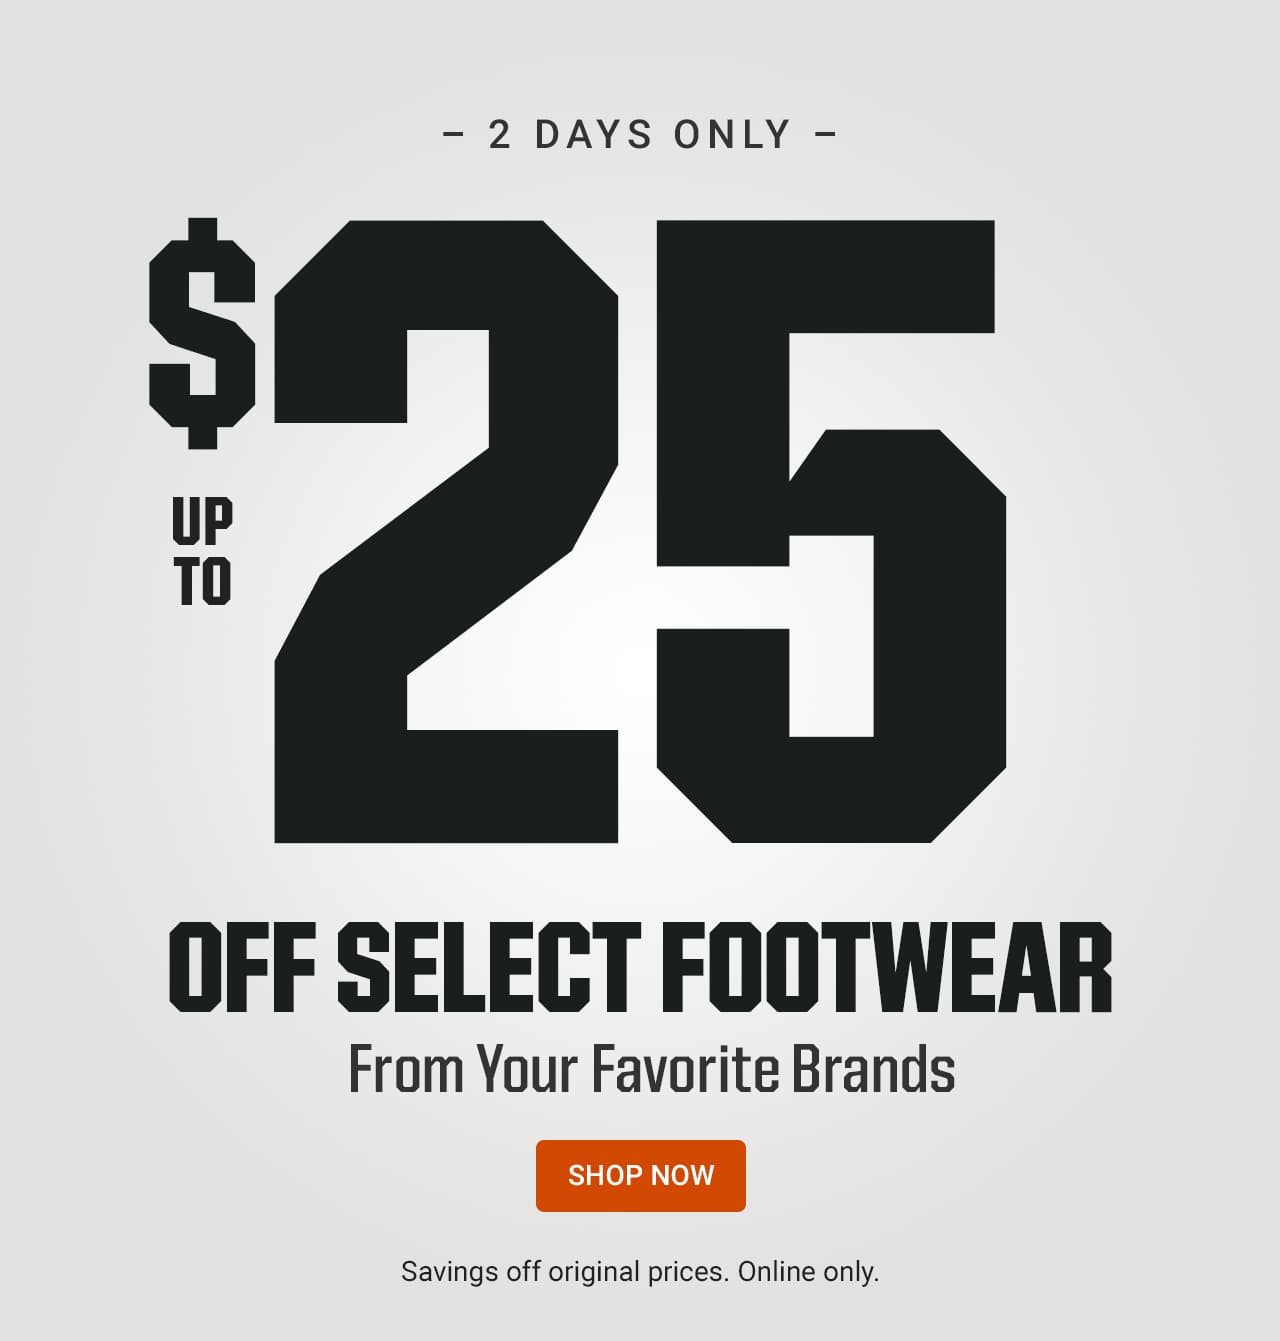 2 days only. Up to $25 off select footwear from your favorite brands. Savings off original prices. Online only. Shop now.